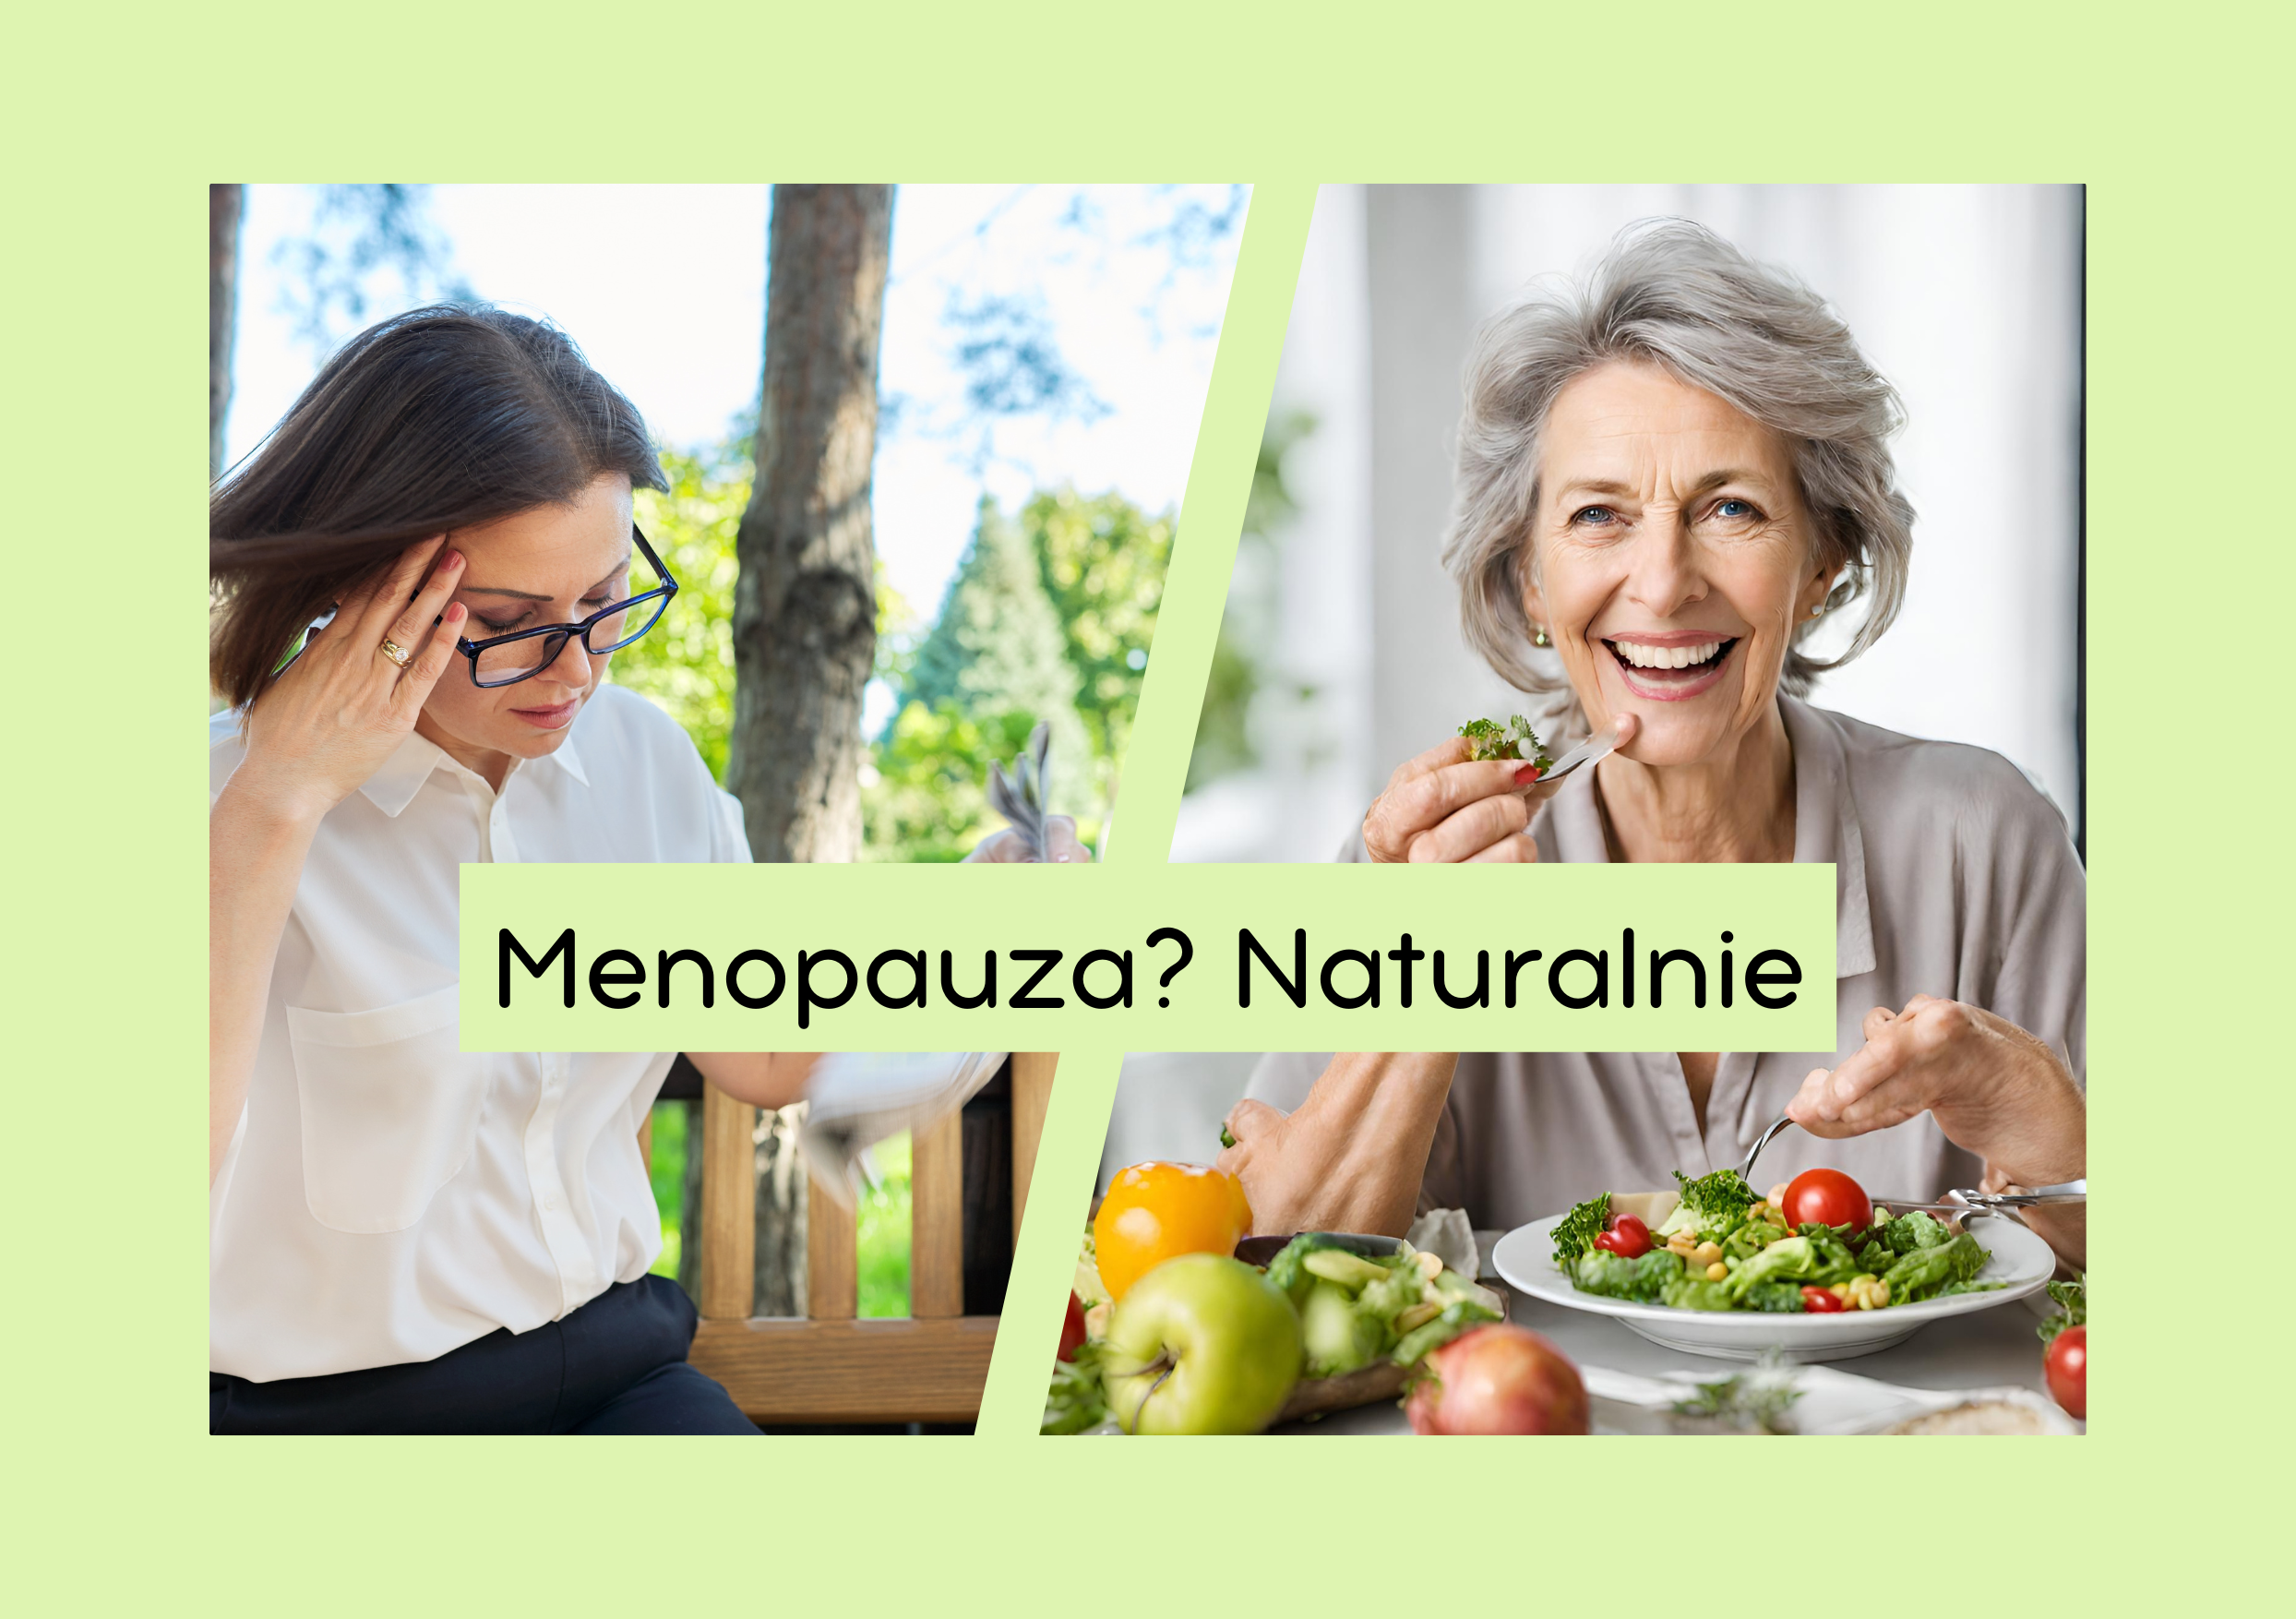 You are currently viewing Menopauza? Naturalnie